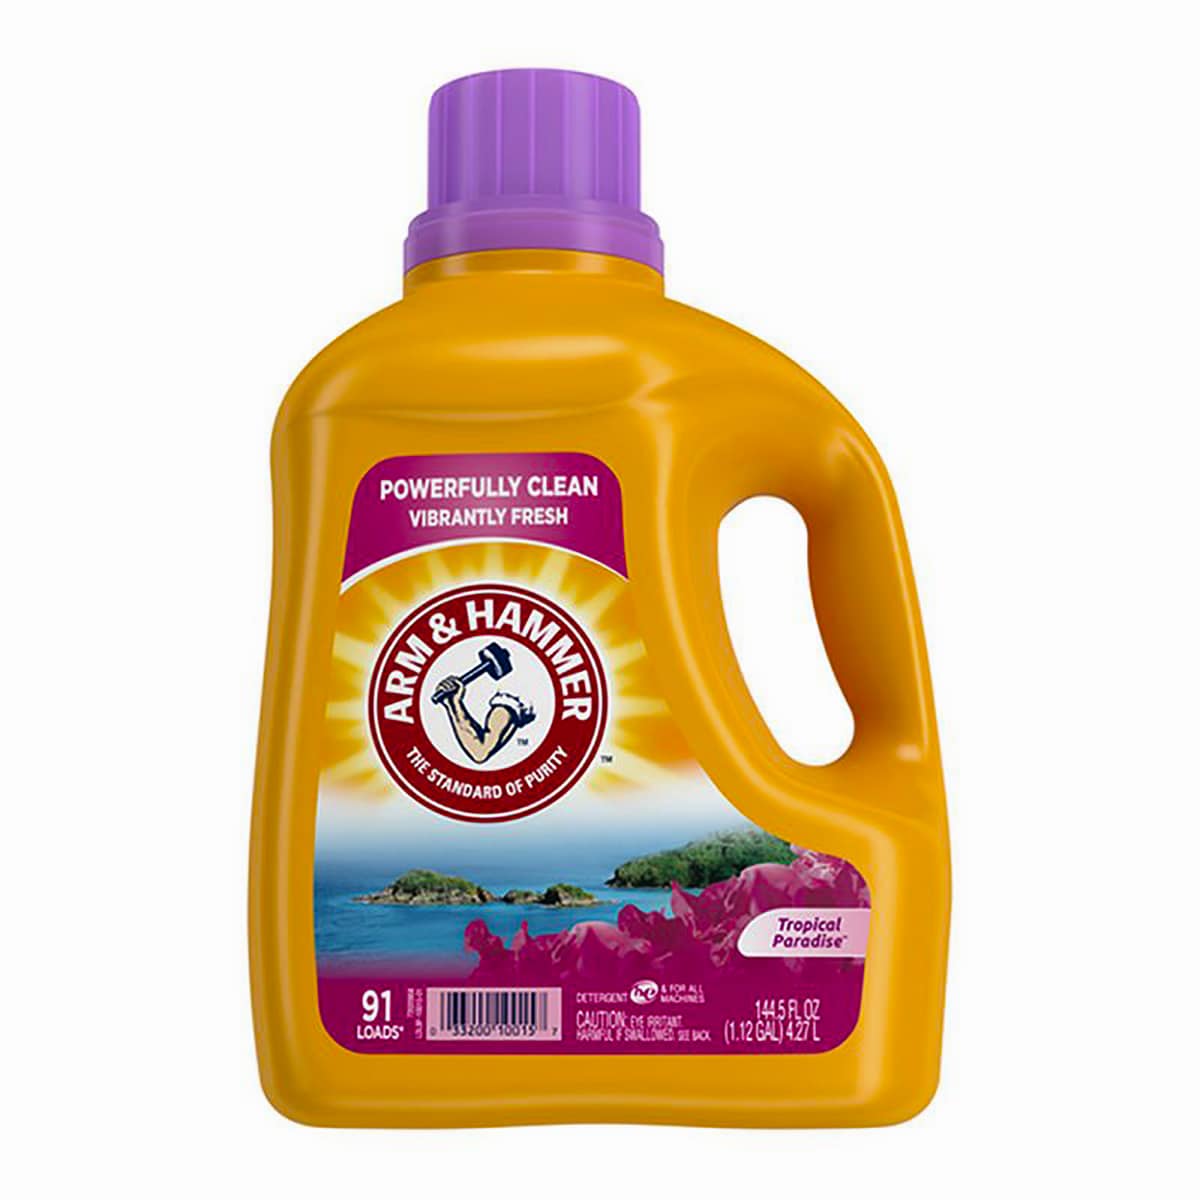 What laundry detergent when traveling is best? - Smarty Pants Mama